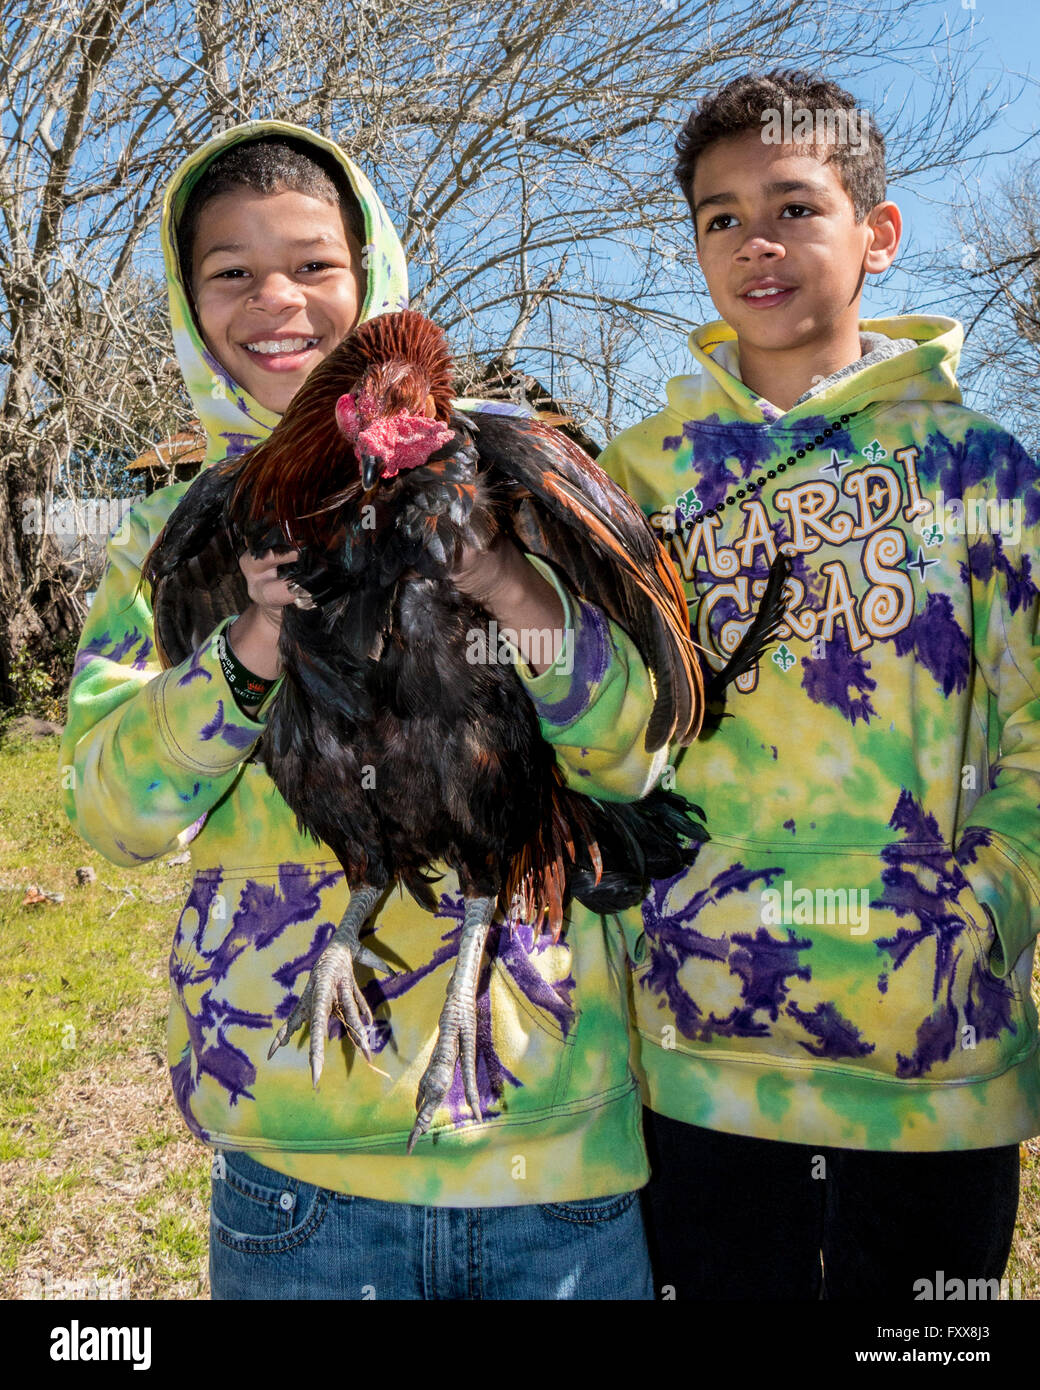 Victorious young boy chicken catcher during the traditional